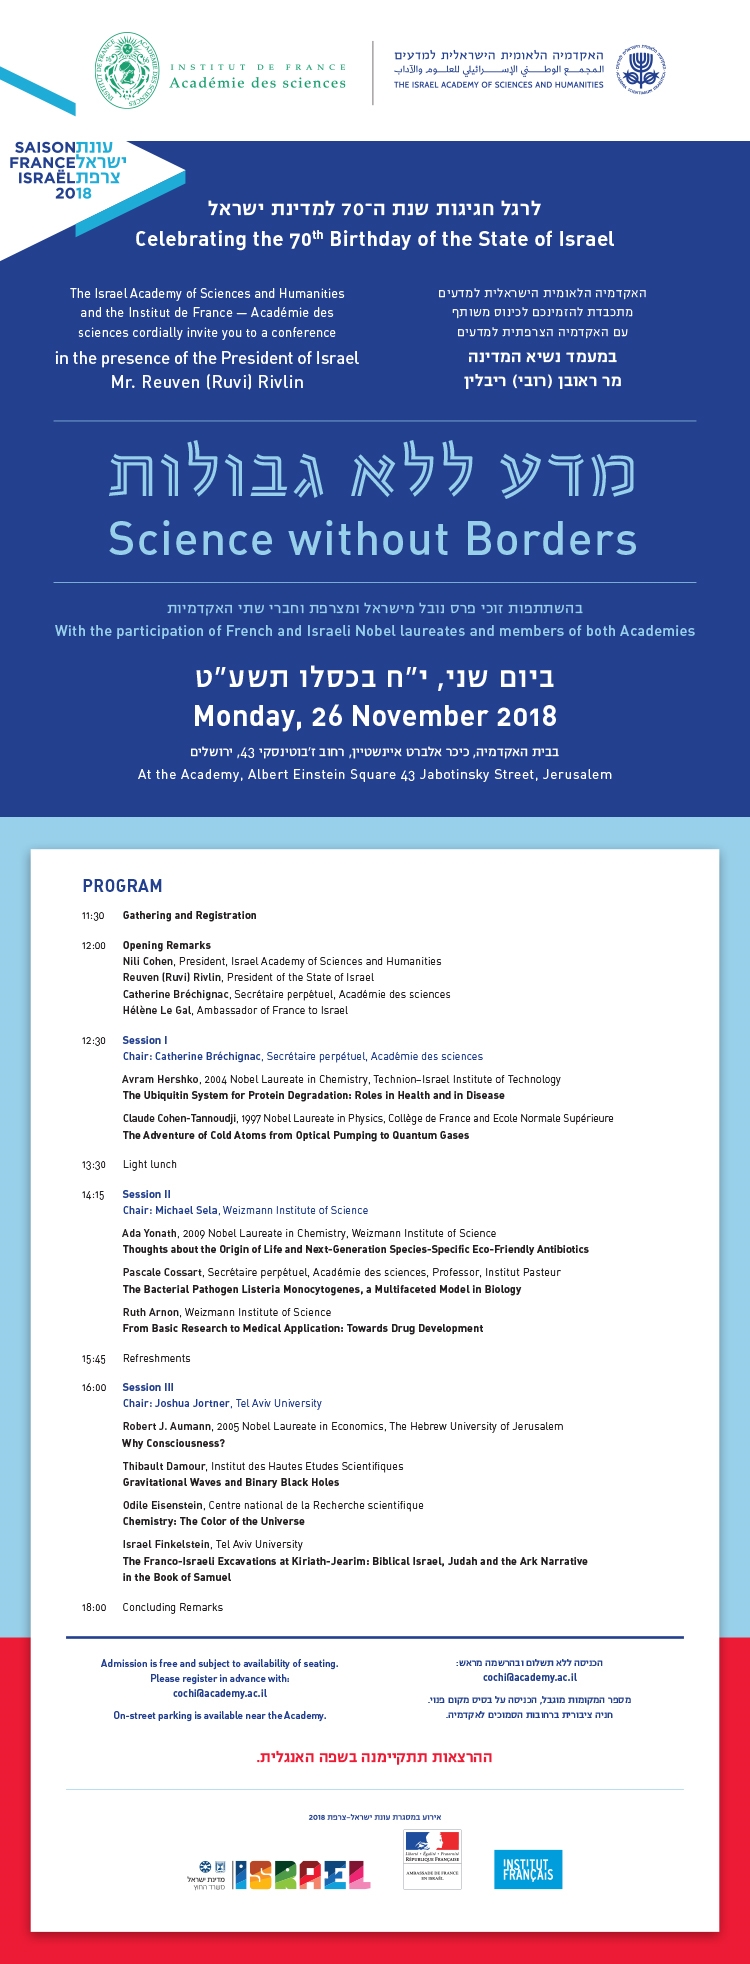 "Science without Borders" - A joint conference by the Israel Academy and the Institut de France, Academie des Sciences, celebrating the 70th birthday of the State of Israel